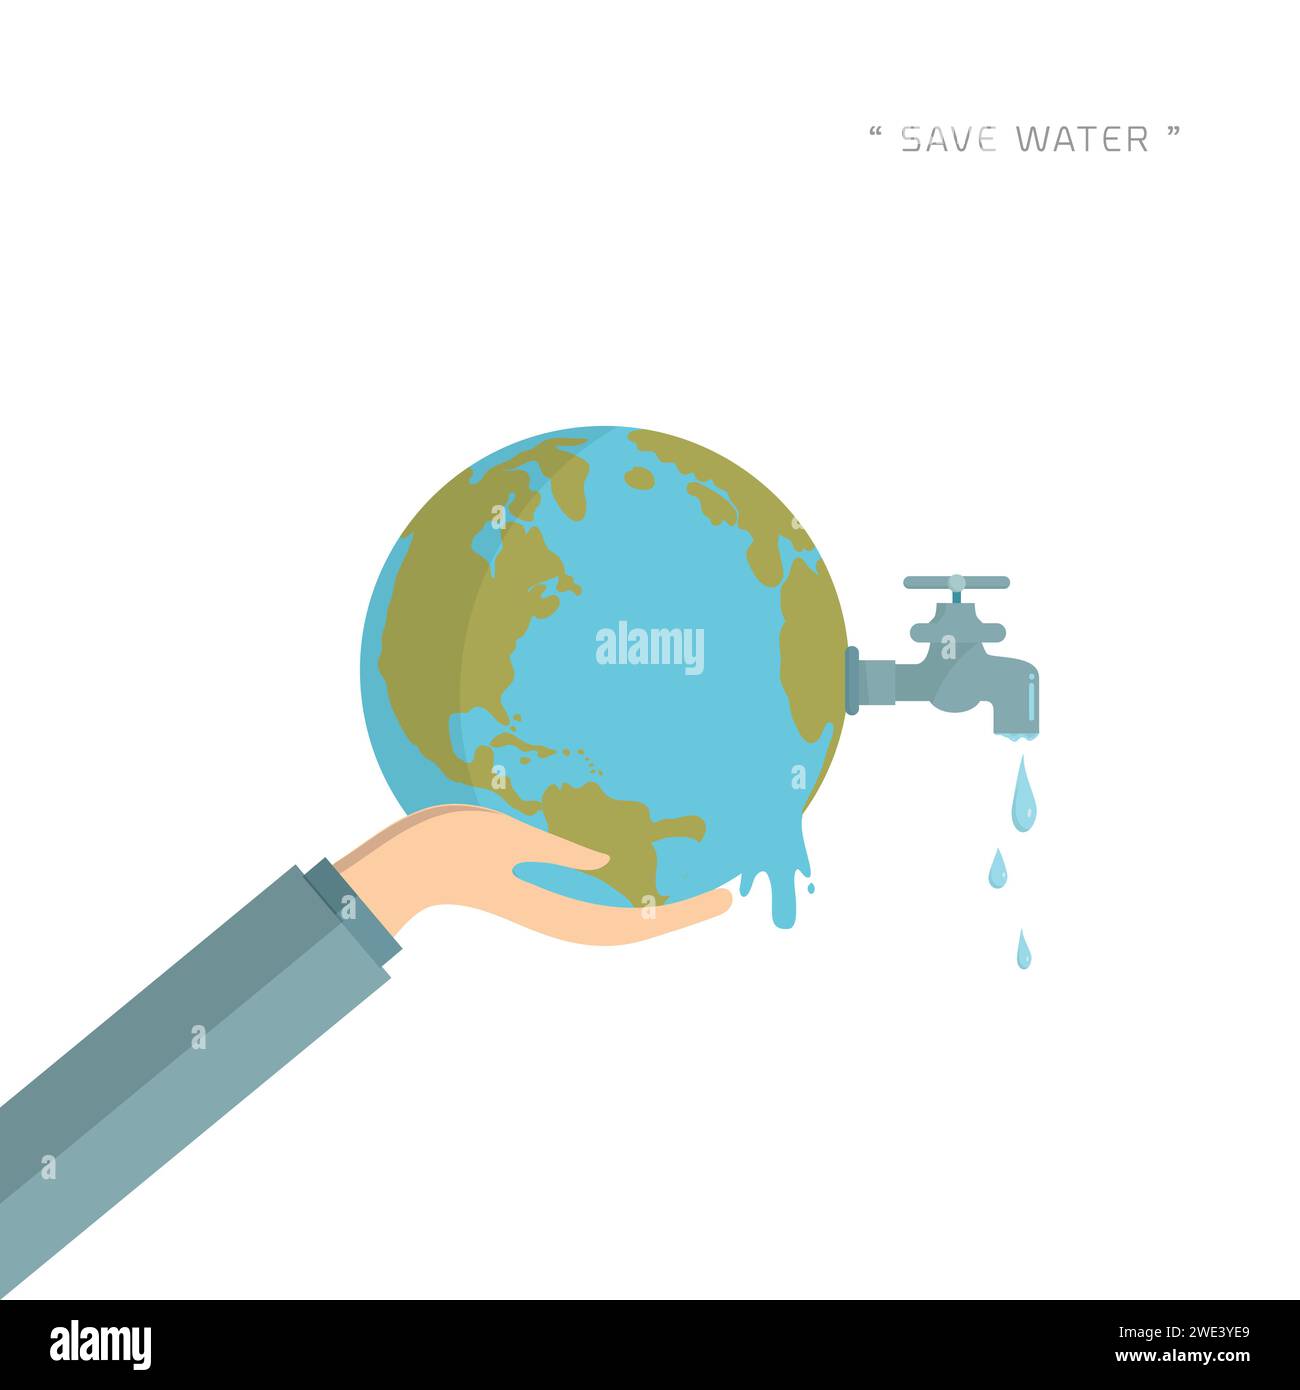 Water world day with hand hold faucet or water tap with a drop of water out to earth and save water text vector design illustration Stock Vector